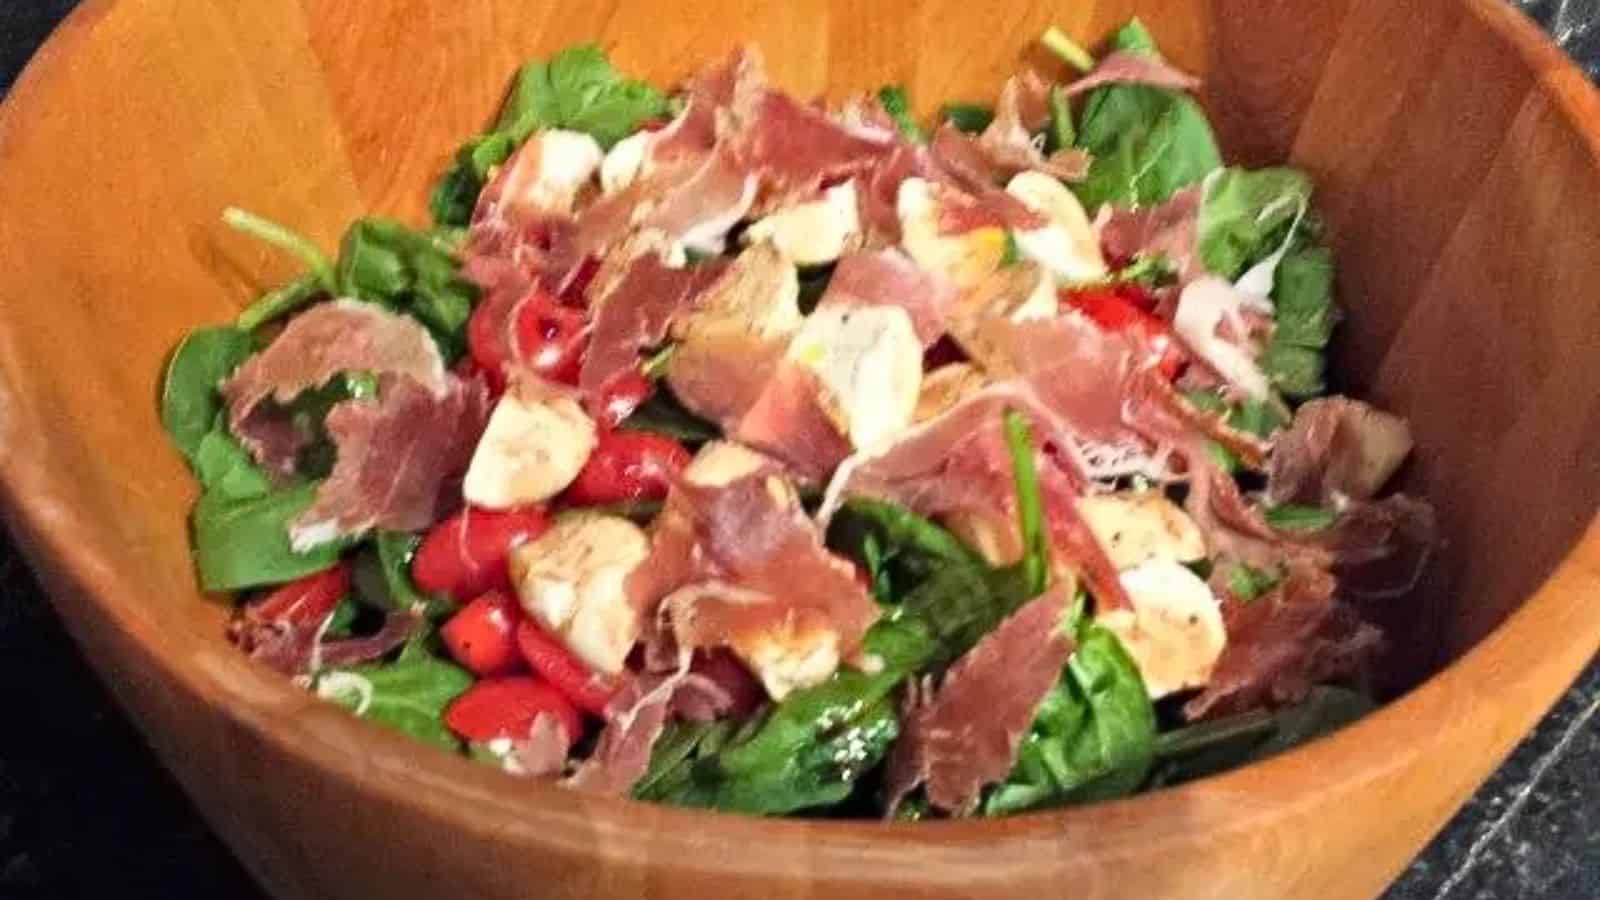 Image shows a Spinach Caprese Salad in a wooden salad bowl.